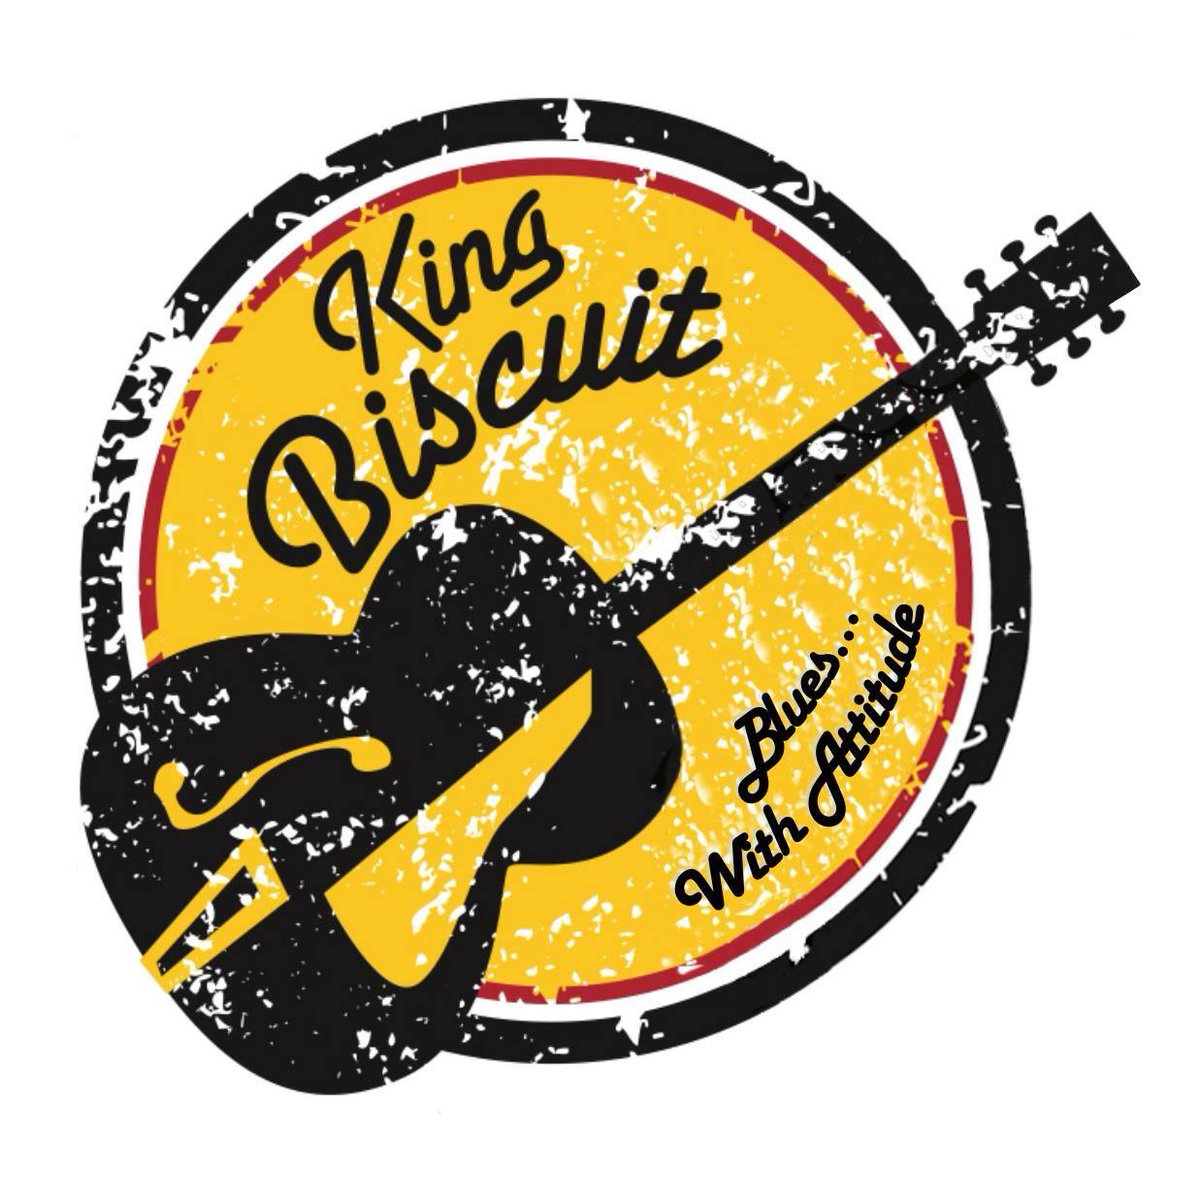 Tonight at O'RIleys, King Biscuit Blues Band supported by Jackson D - free entry/donations welcome. Doors 7pm, Jackson D onstage at 8pm, King Biscuit Blues Band at 9pm @livemusicinhull @gr8musicvenues @bbcburnsy @HULLwhatson @VHEY_UK @VisitHull @VisitHullEvents